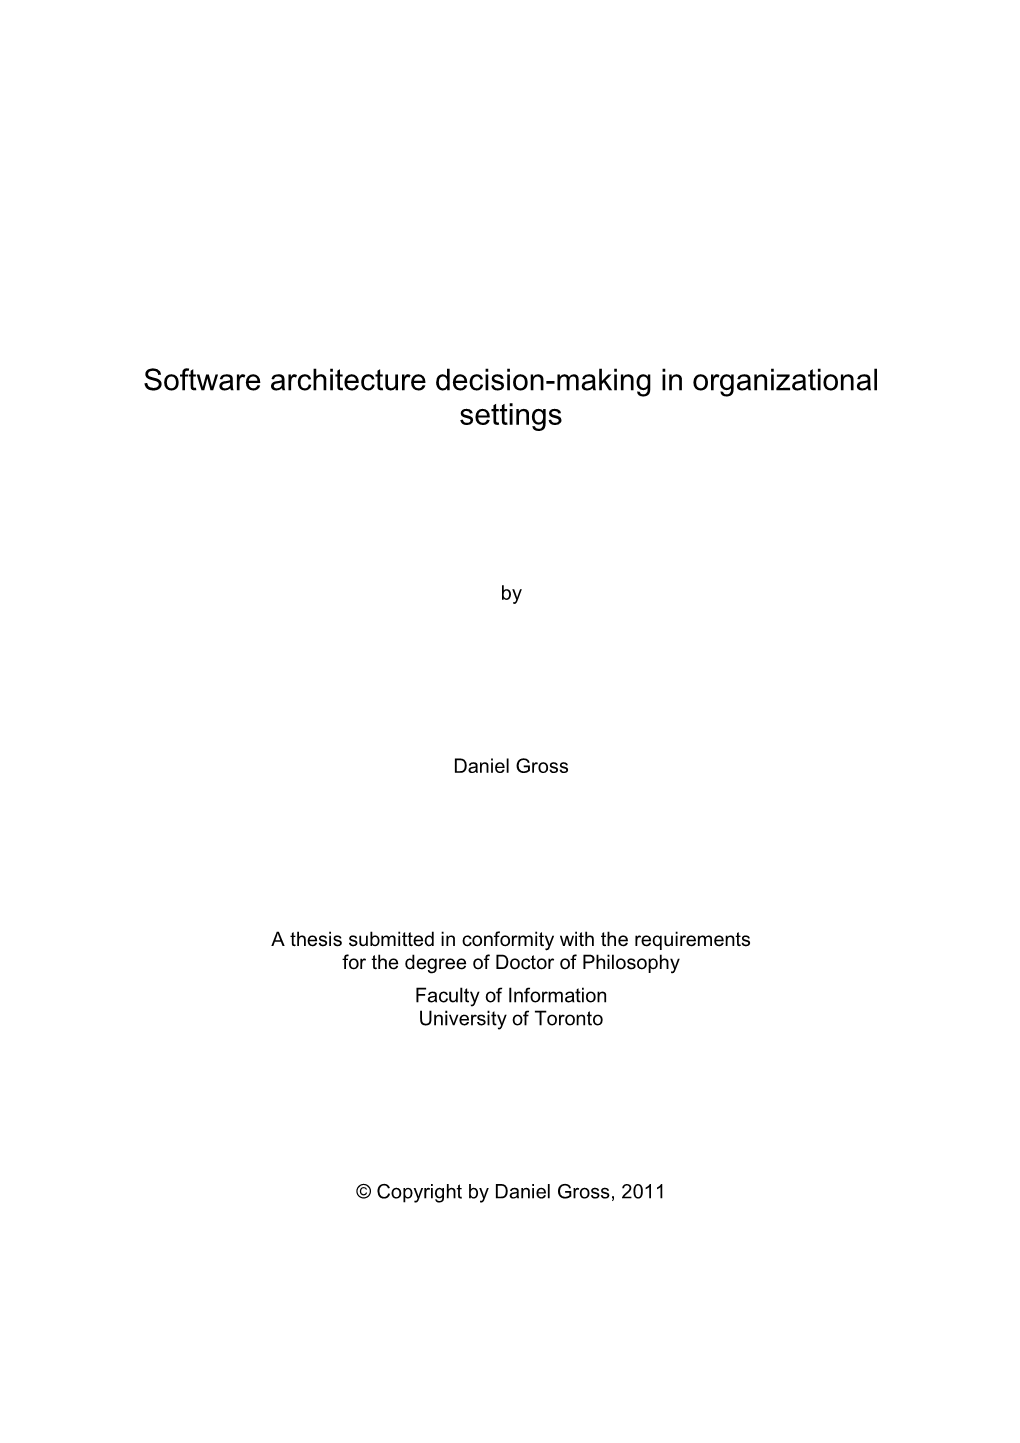 Software Architecture Decision-Making in Organizational Settings